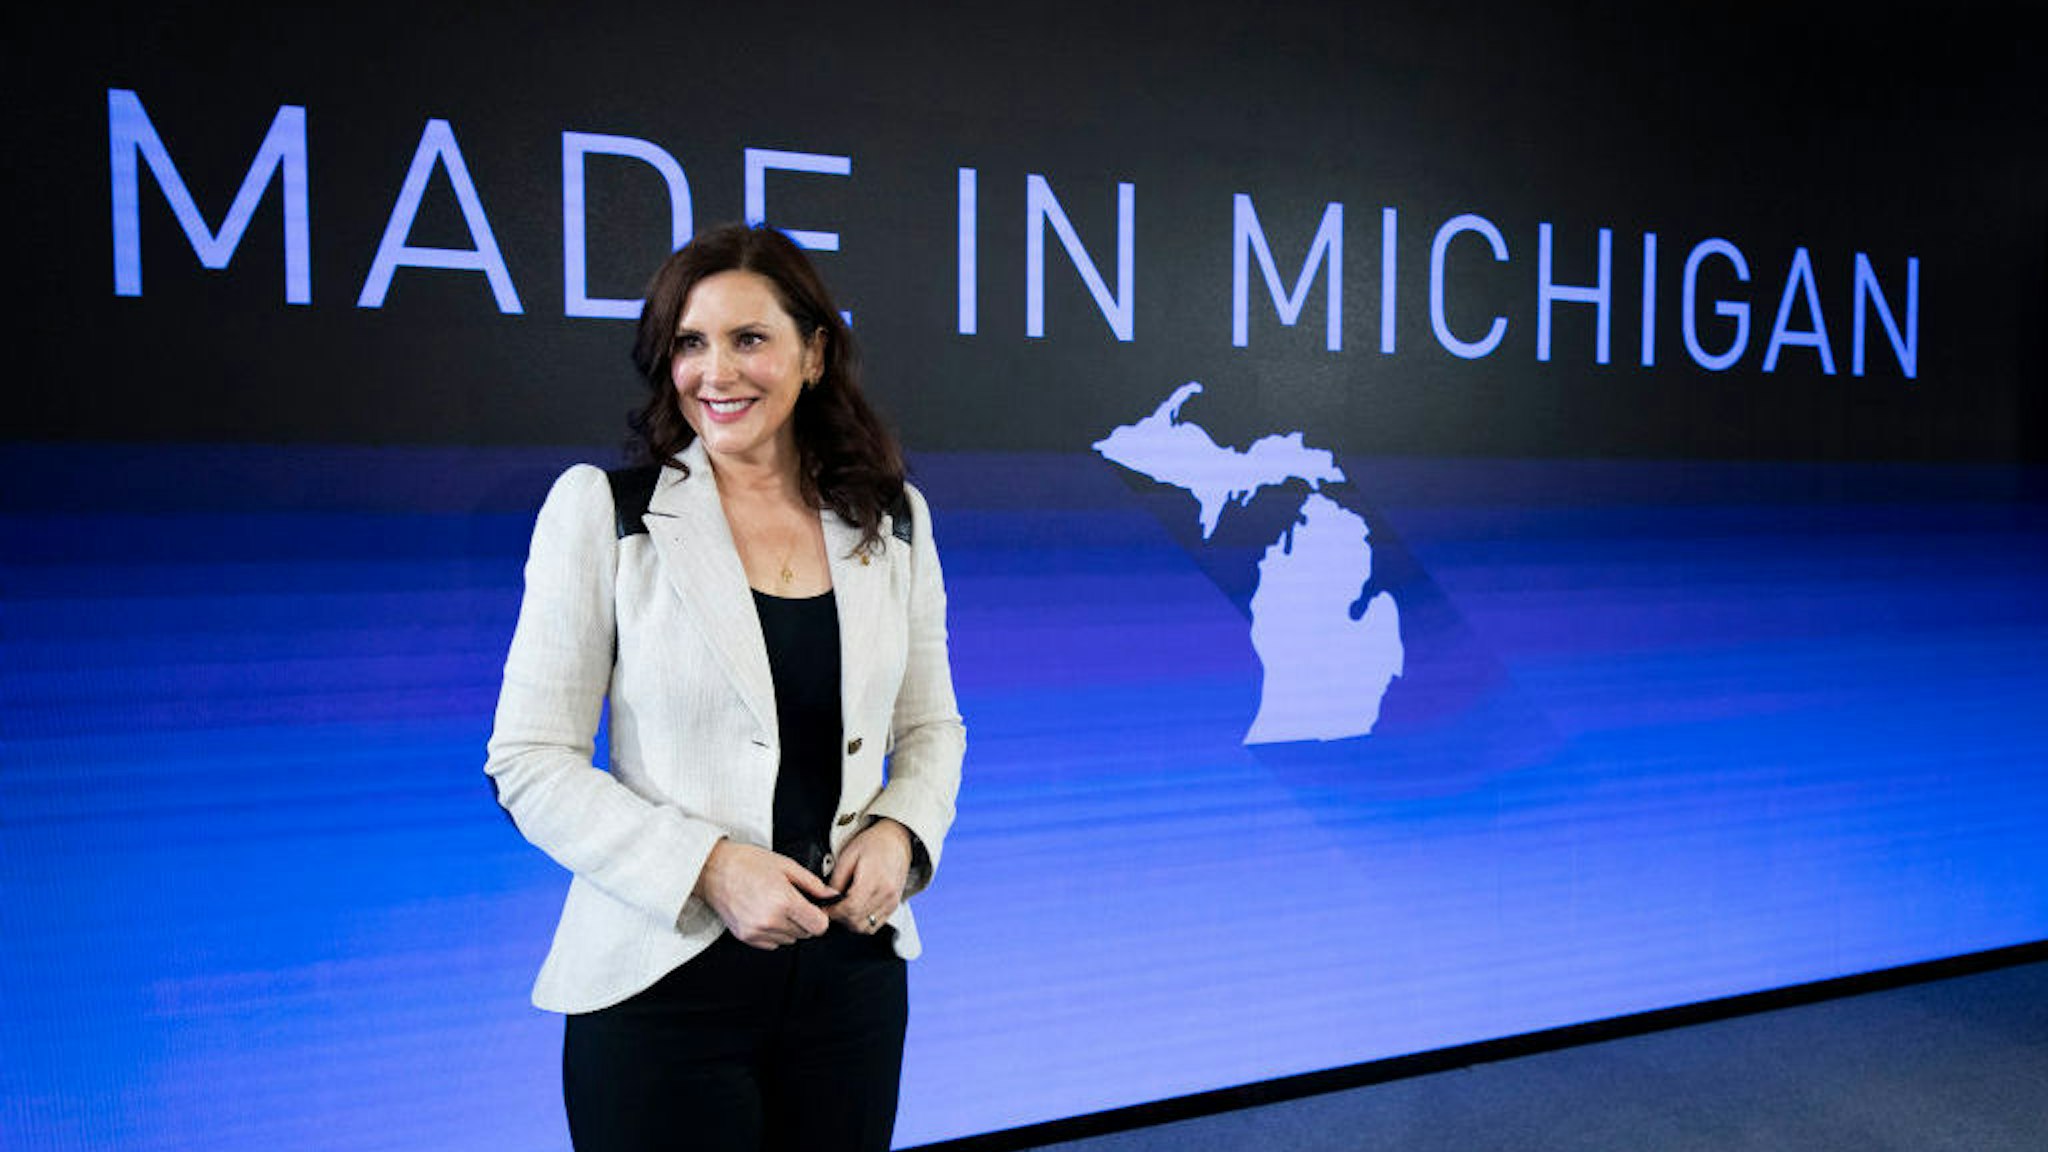 LANSING, MI - JANUARY 25: Michigan Governor Gretchen Whitmer poses for a photo after an event at which General Motors announced they are making a $7 billion investment, the largest in the company’s history, in electric vehicle and battery production in the state of Michigan on January 25, 2022 in Lansing, Michigan. The investment will be used at 4 facilities in Michigan and will create 4,000 jobs. (Photo by Bill Pugliano/Getty Images)